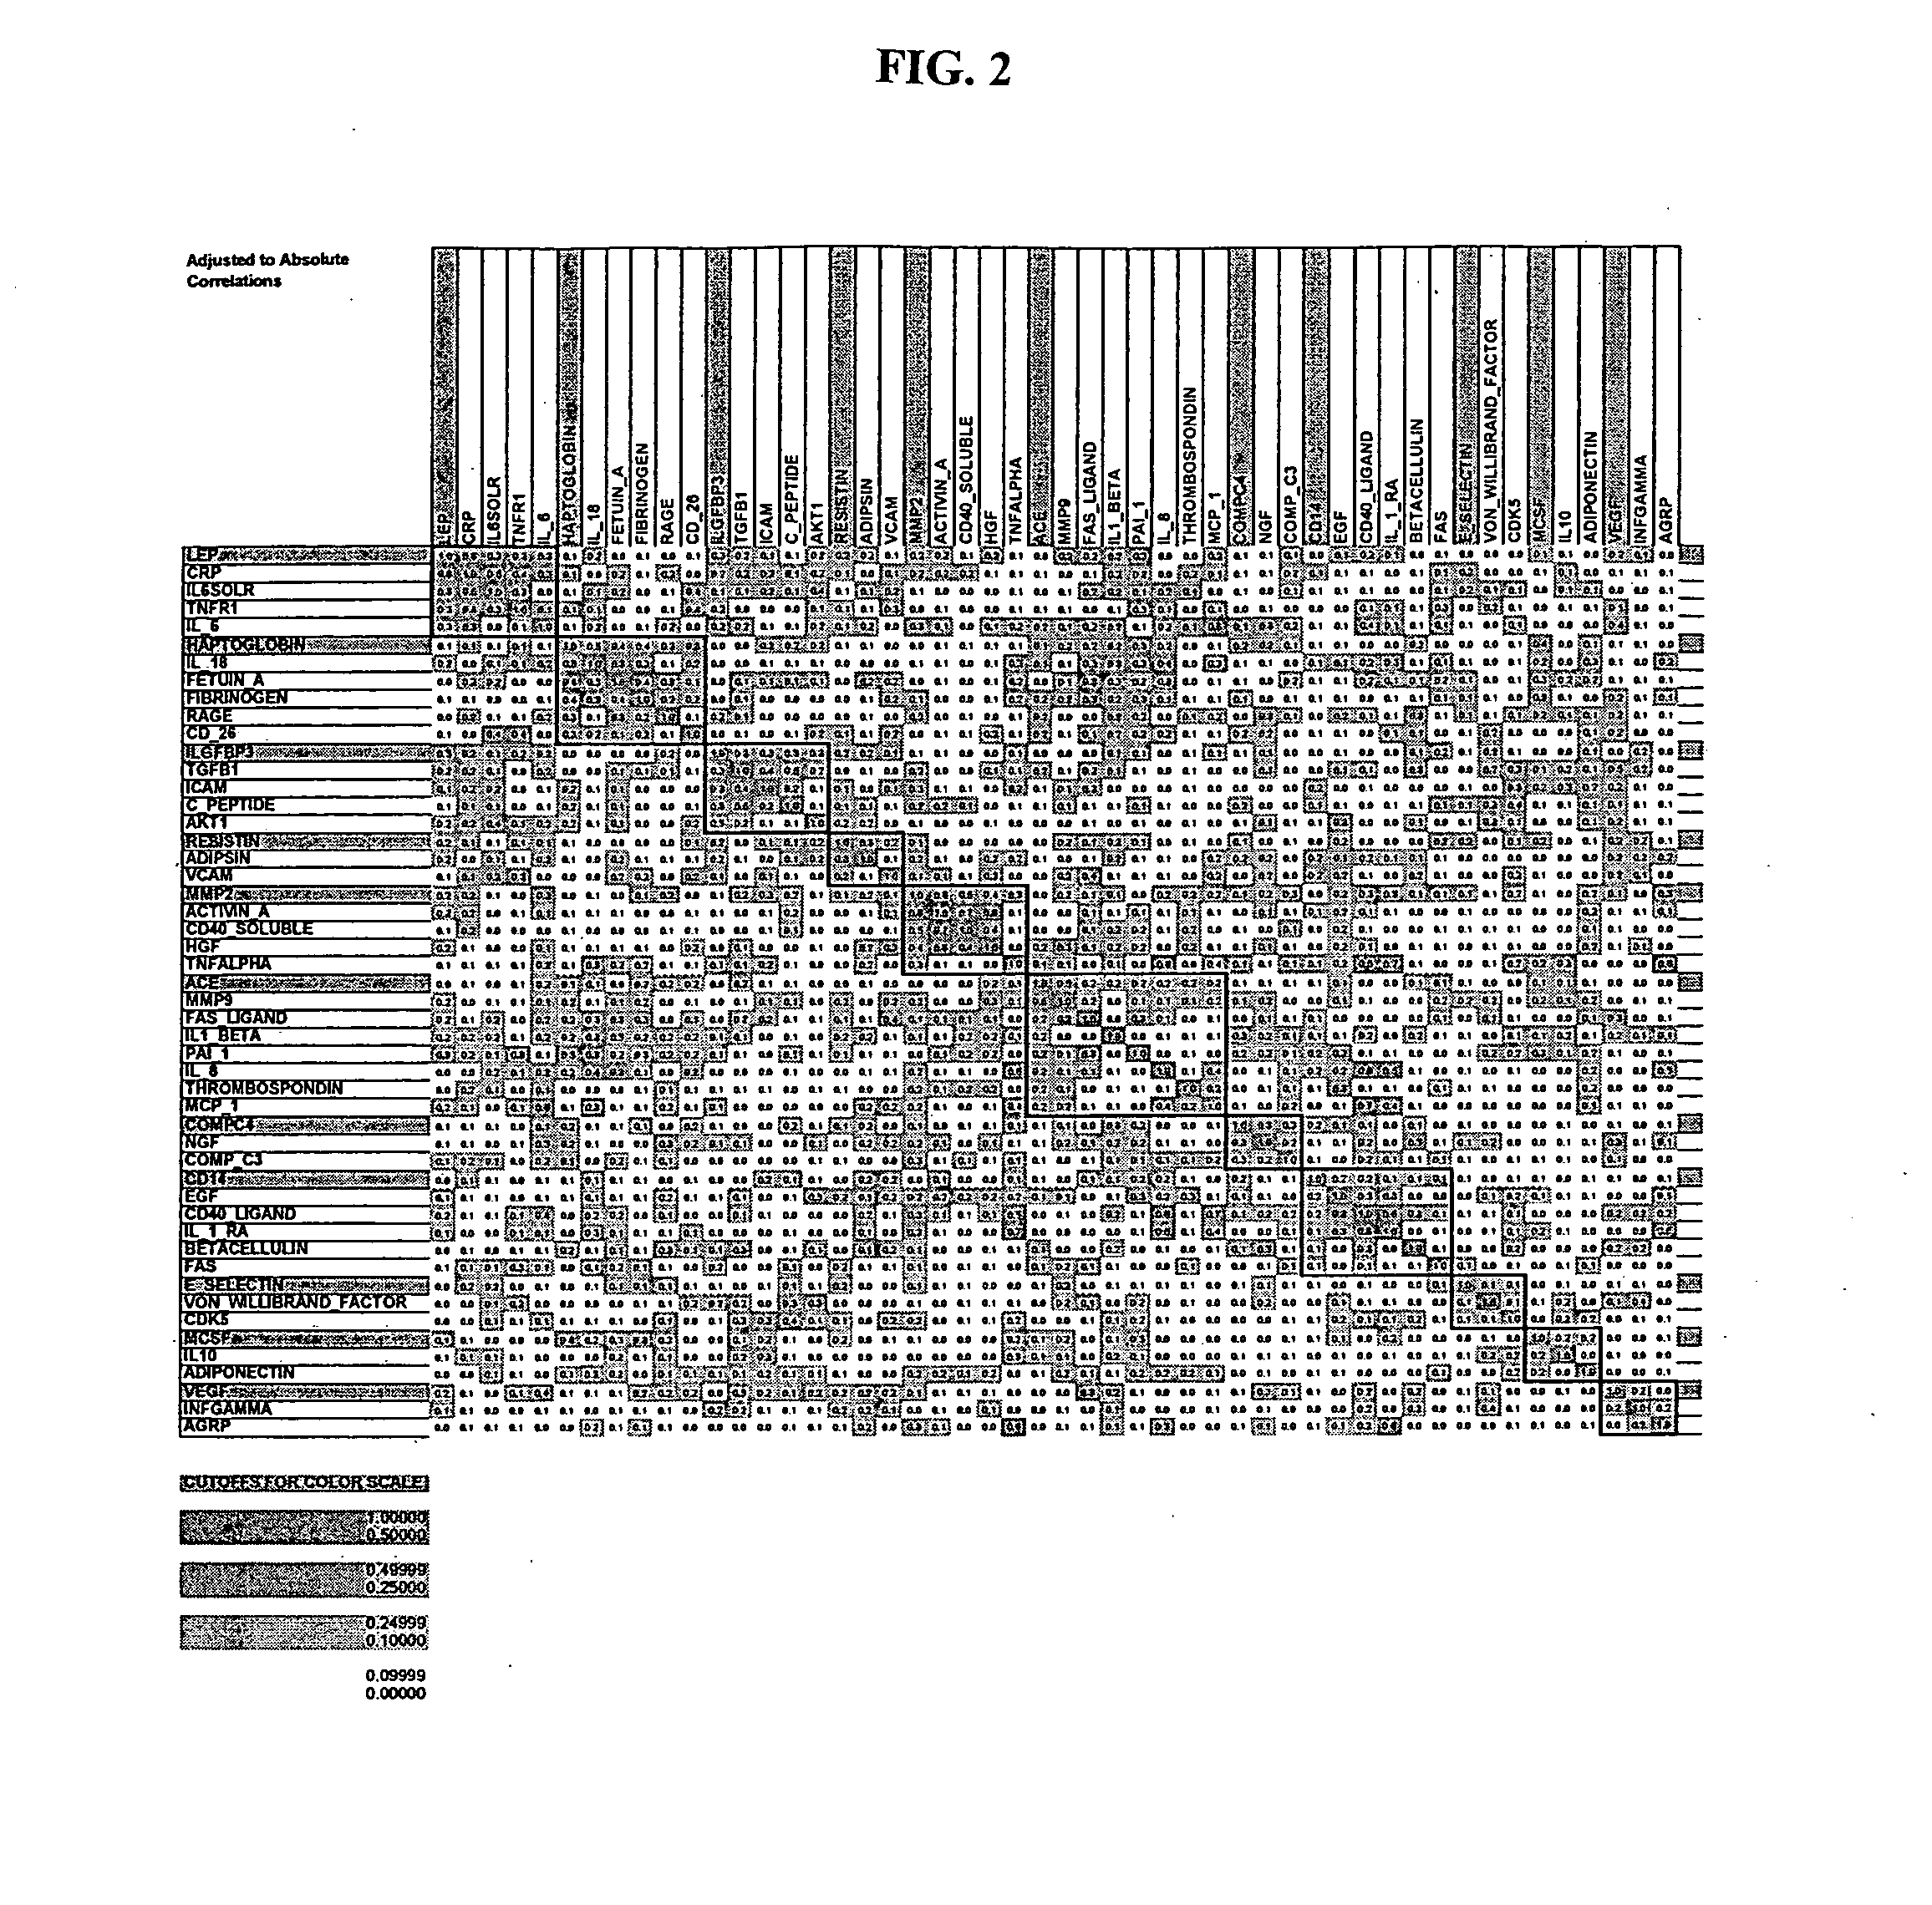 Diabetes-associated markers and methods of use thereof